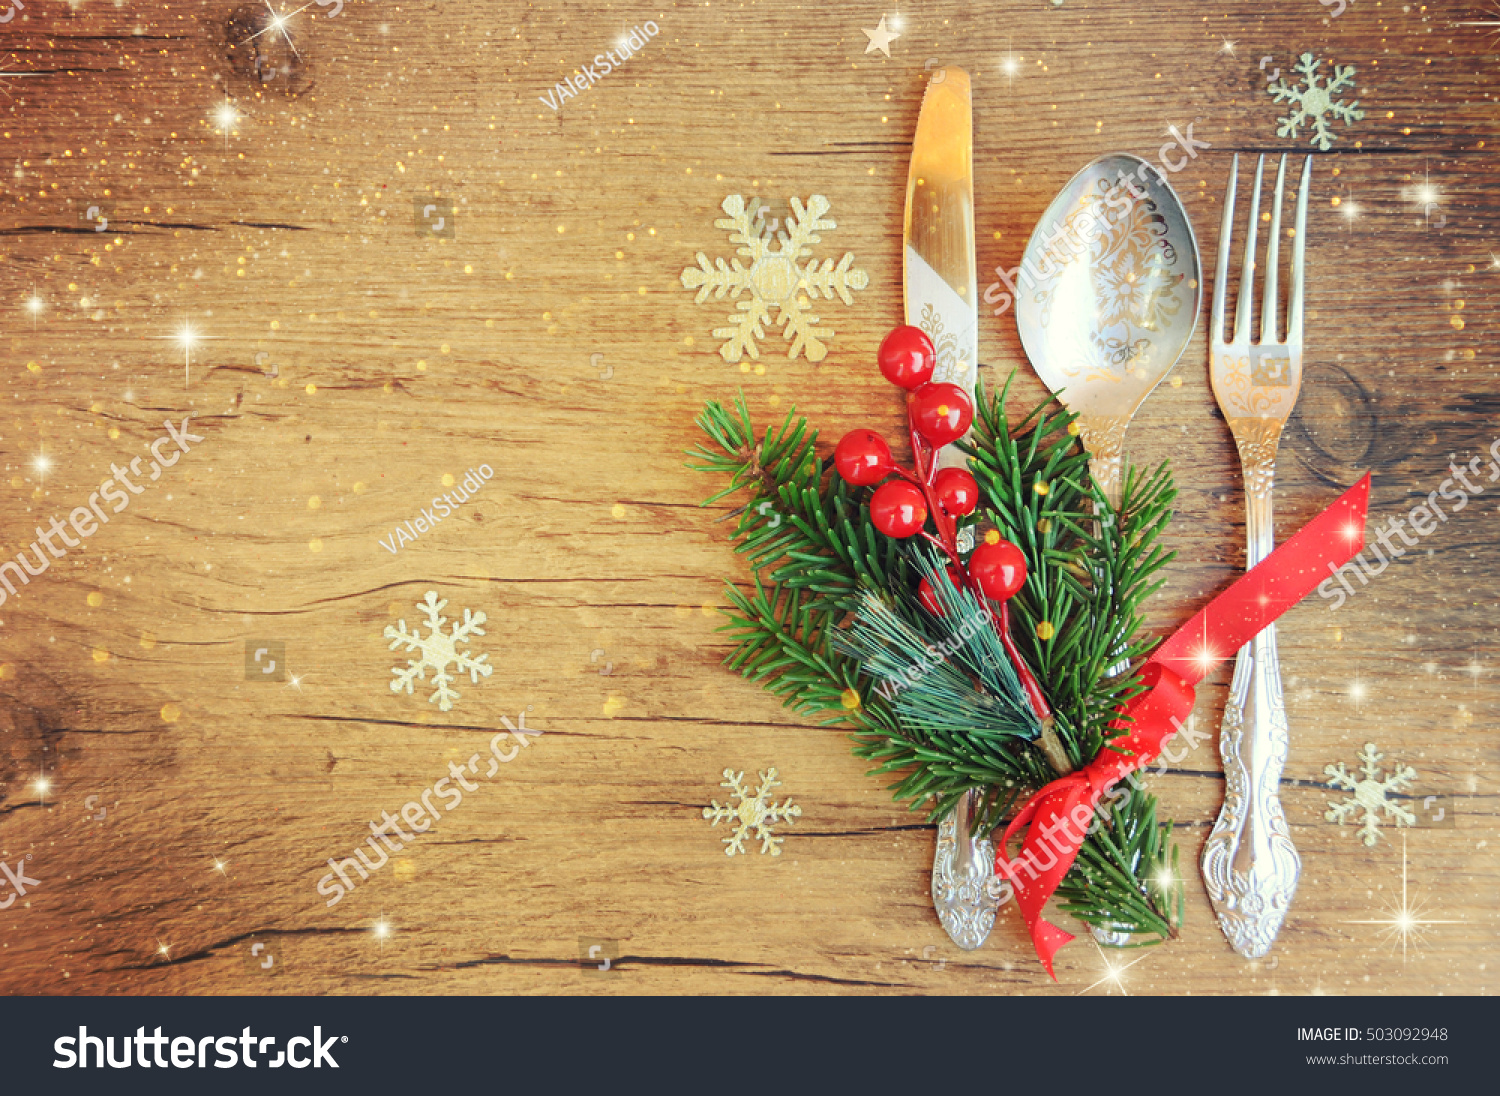 Family Holiday, Christmas Table Place Setting. Stock Photo 503092948 ...